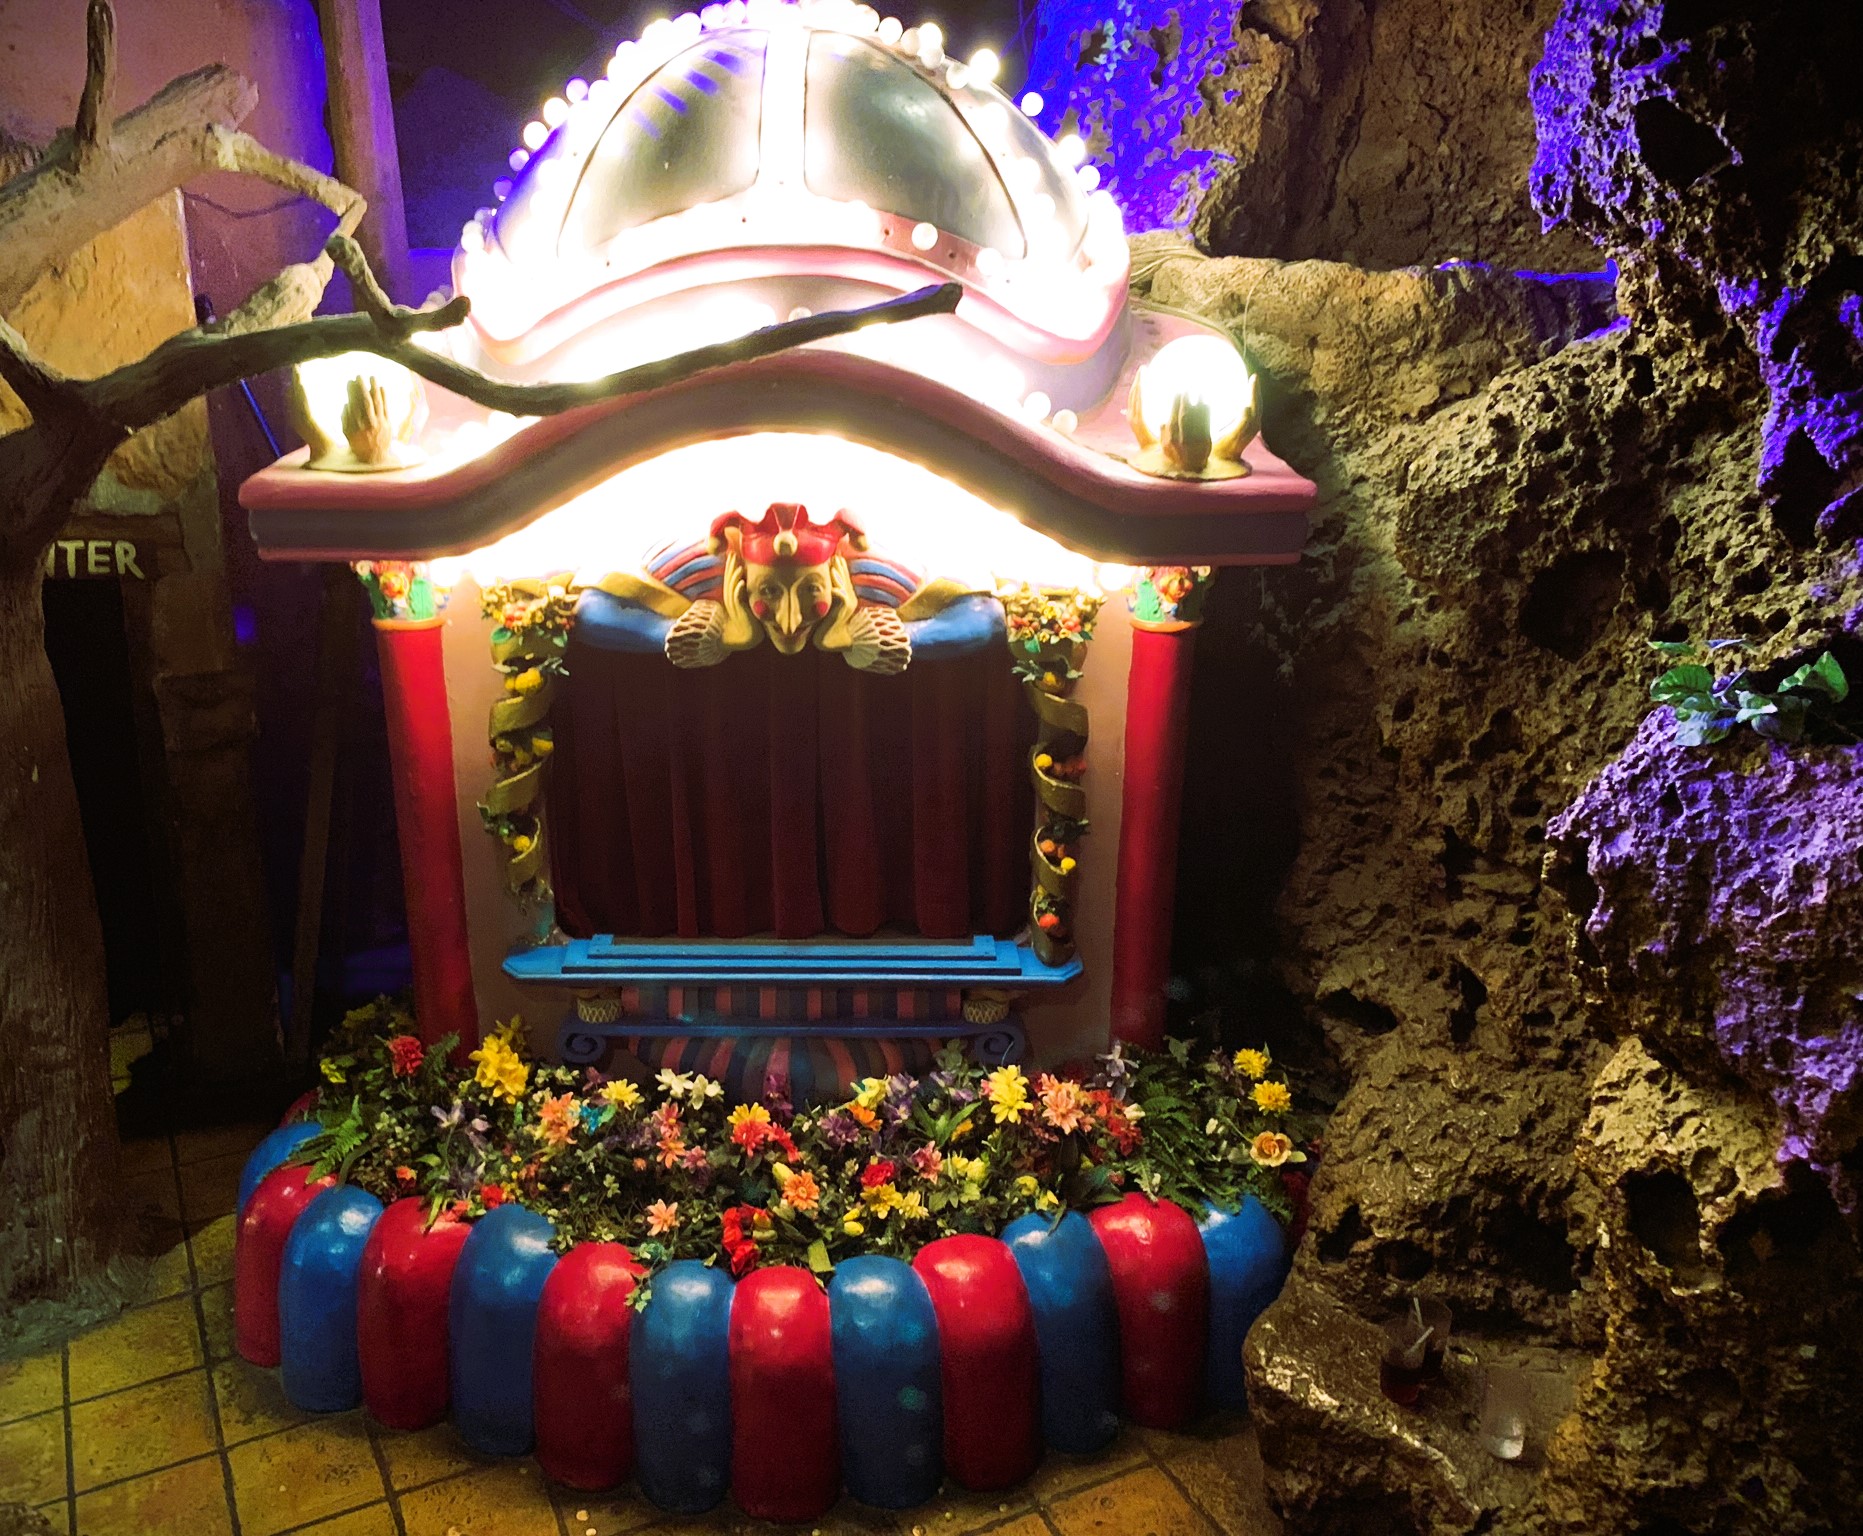 Puppet shows are just one of the many kid favorites at Casa Bonita.